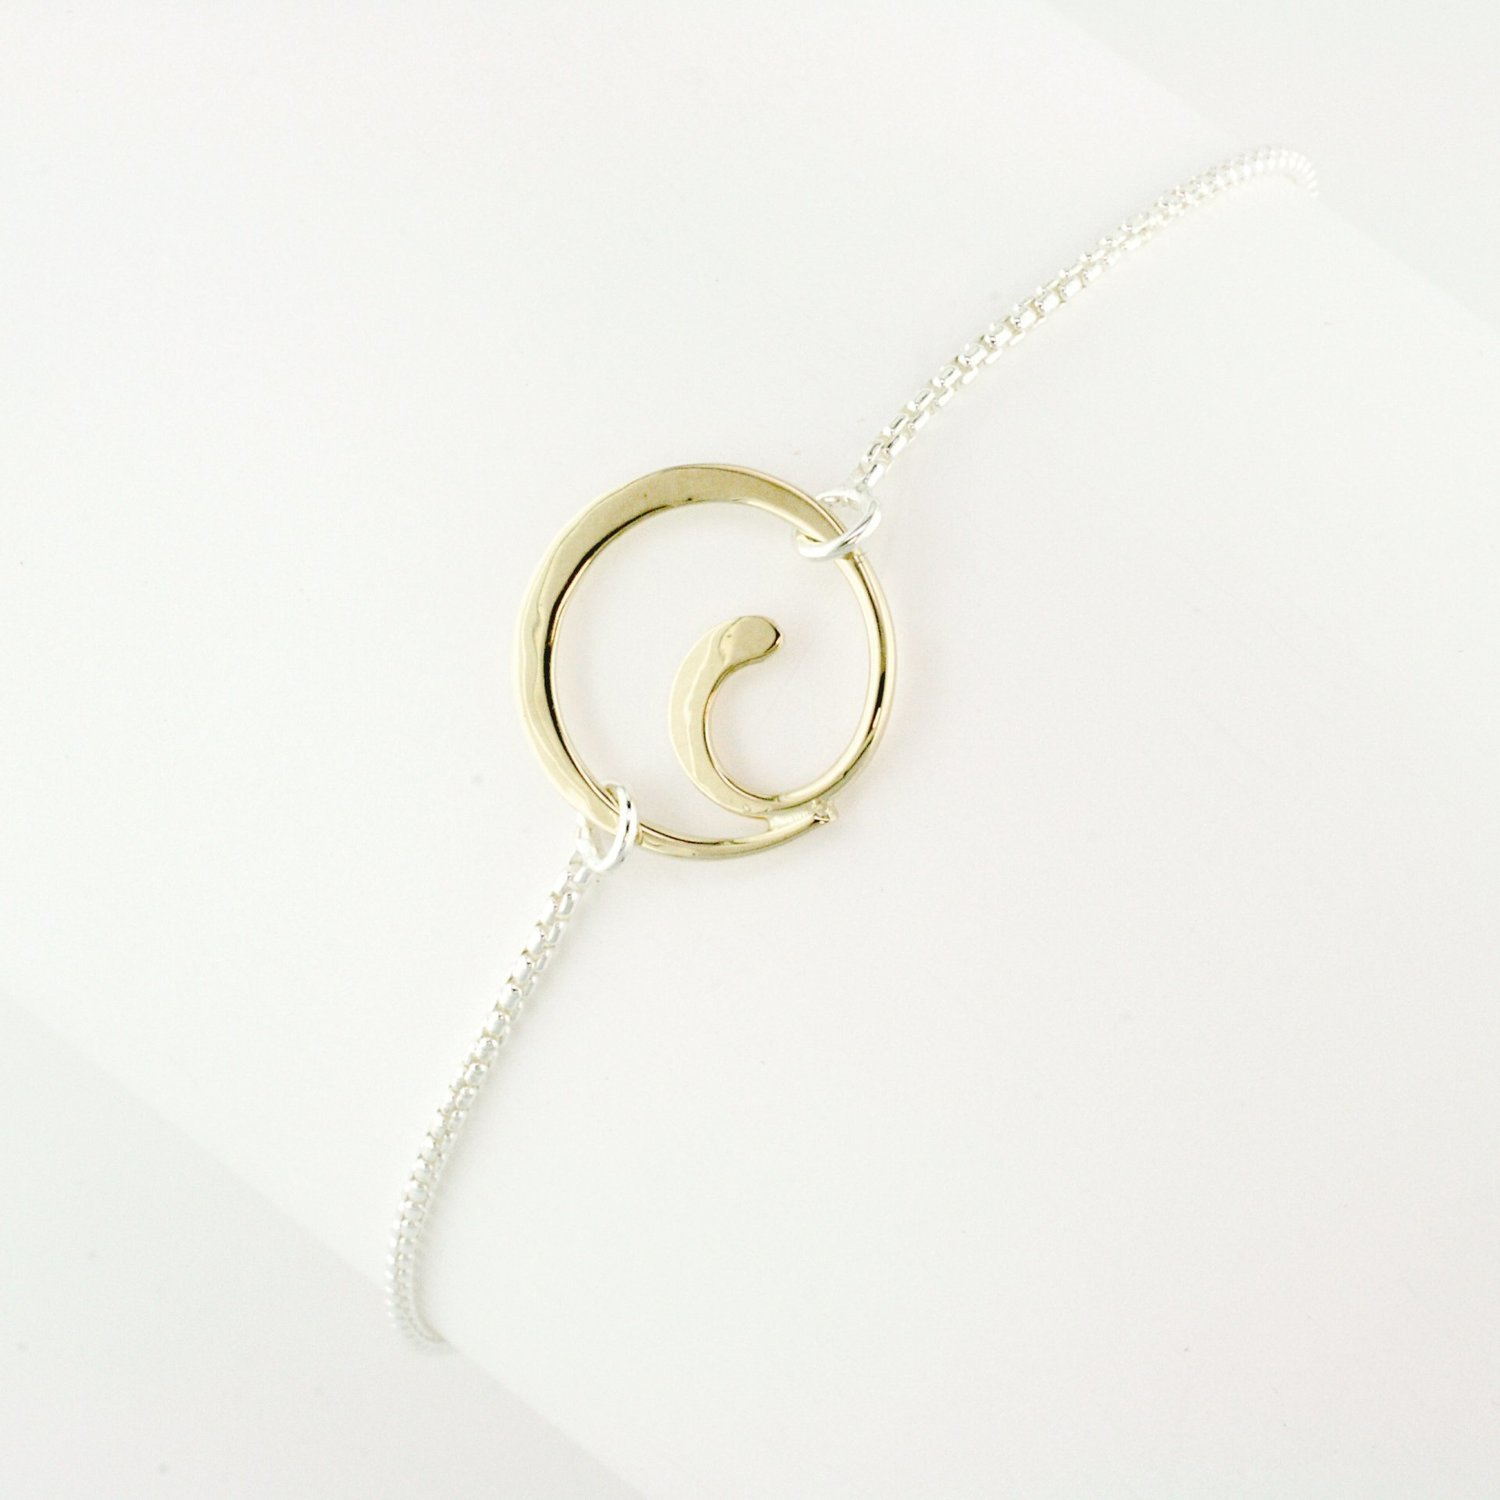 14K Yellow Gold and Sterling Silver Little Spiral Bracelet